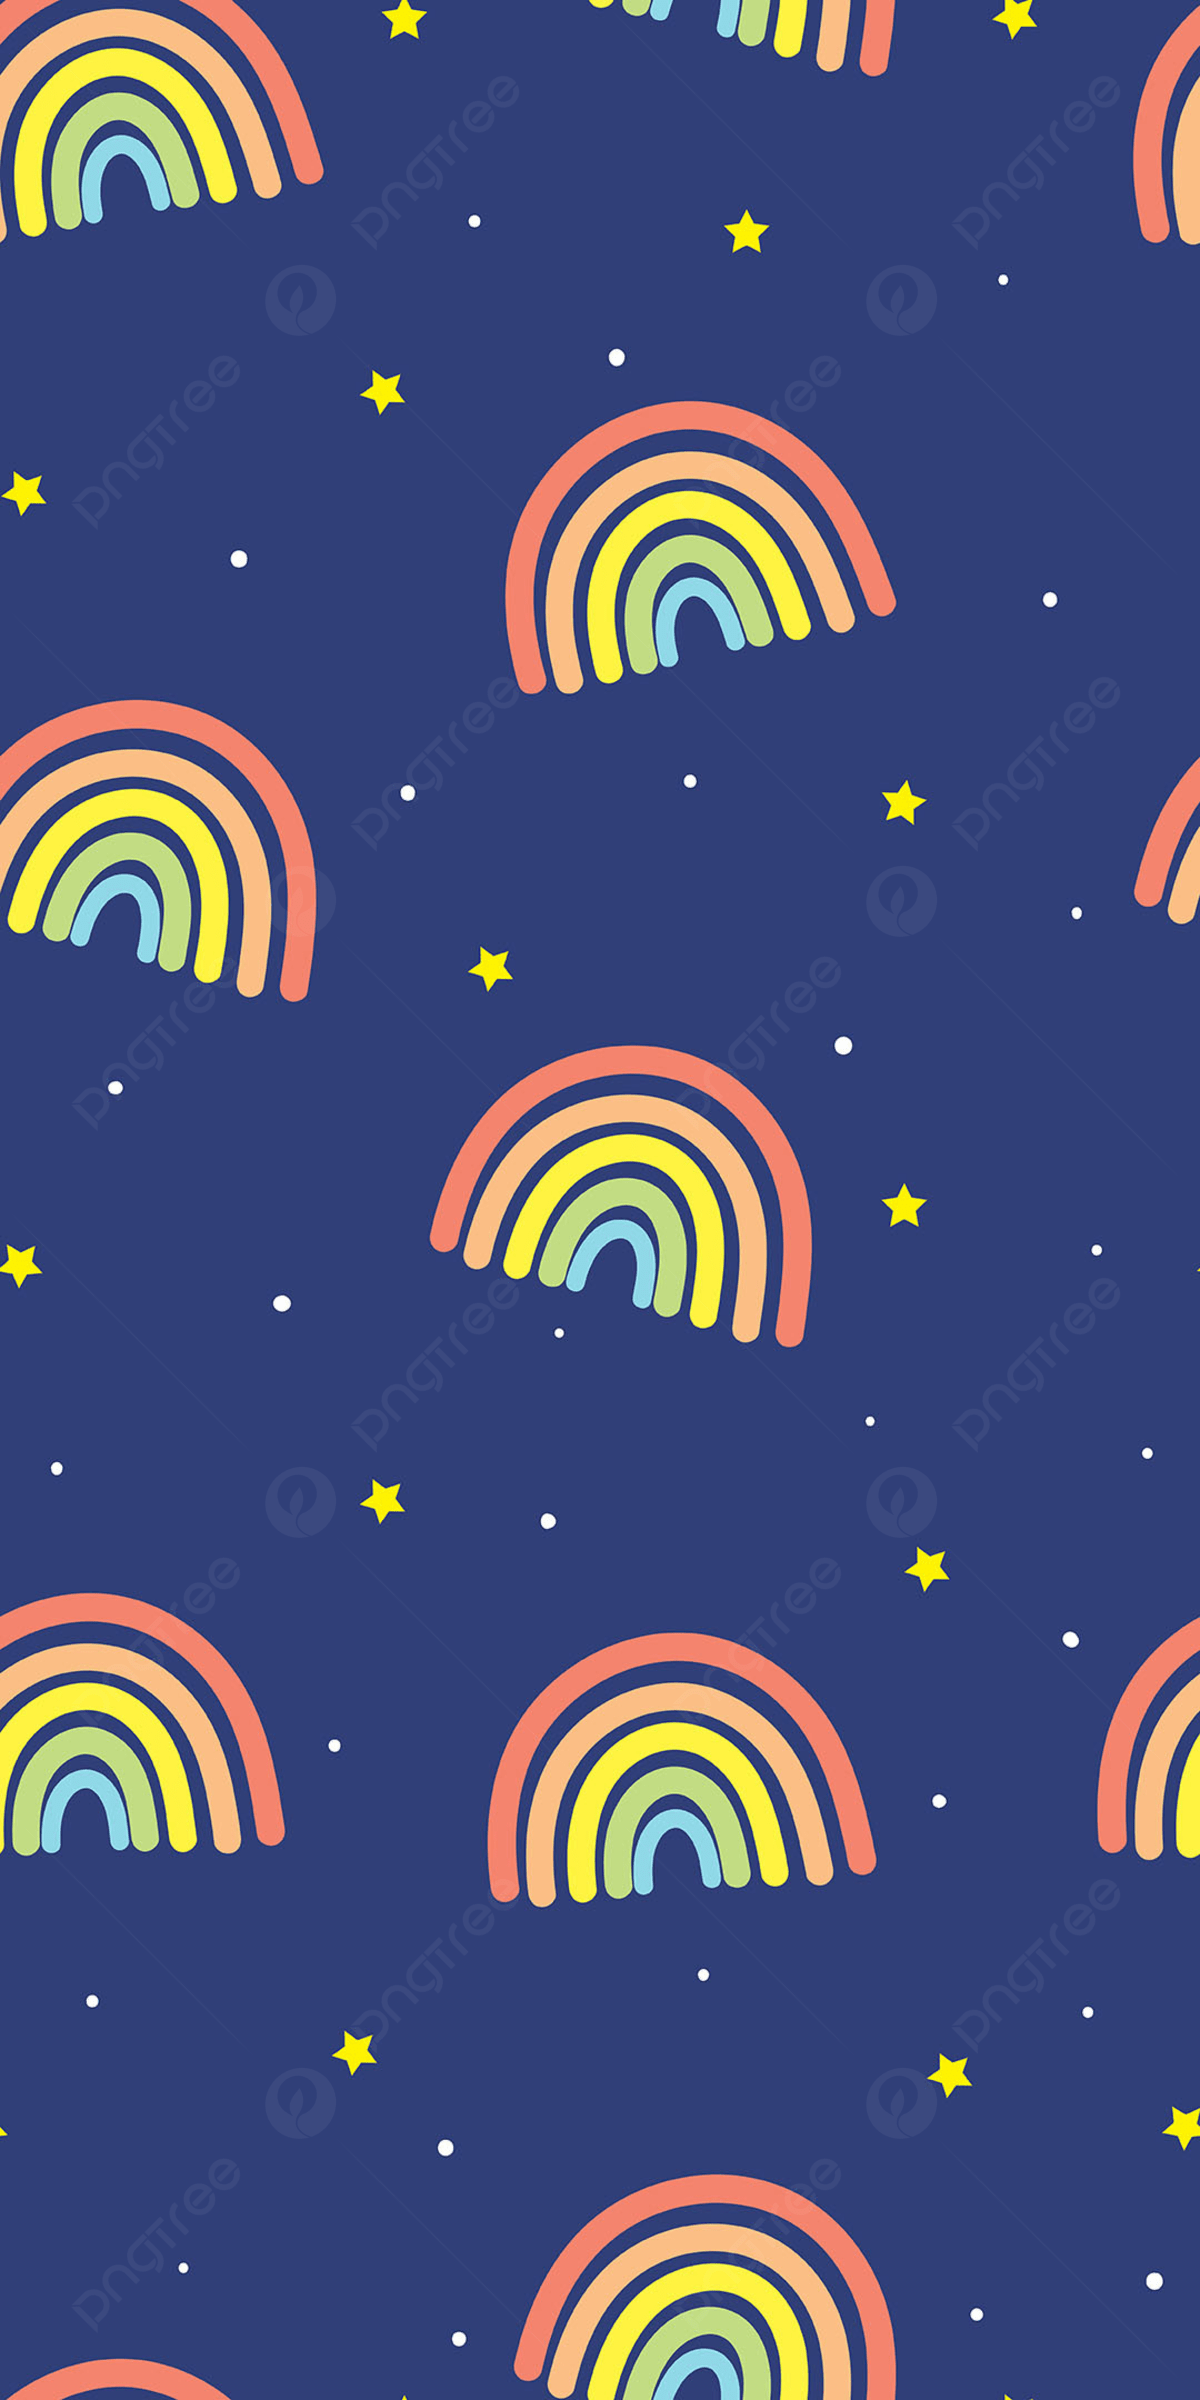 A blue background with hand drawn rainbows and yellow stars - Rainbows